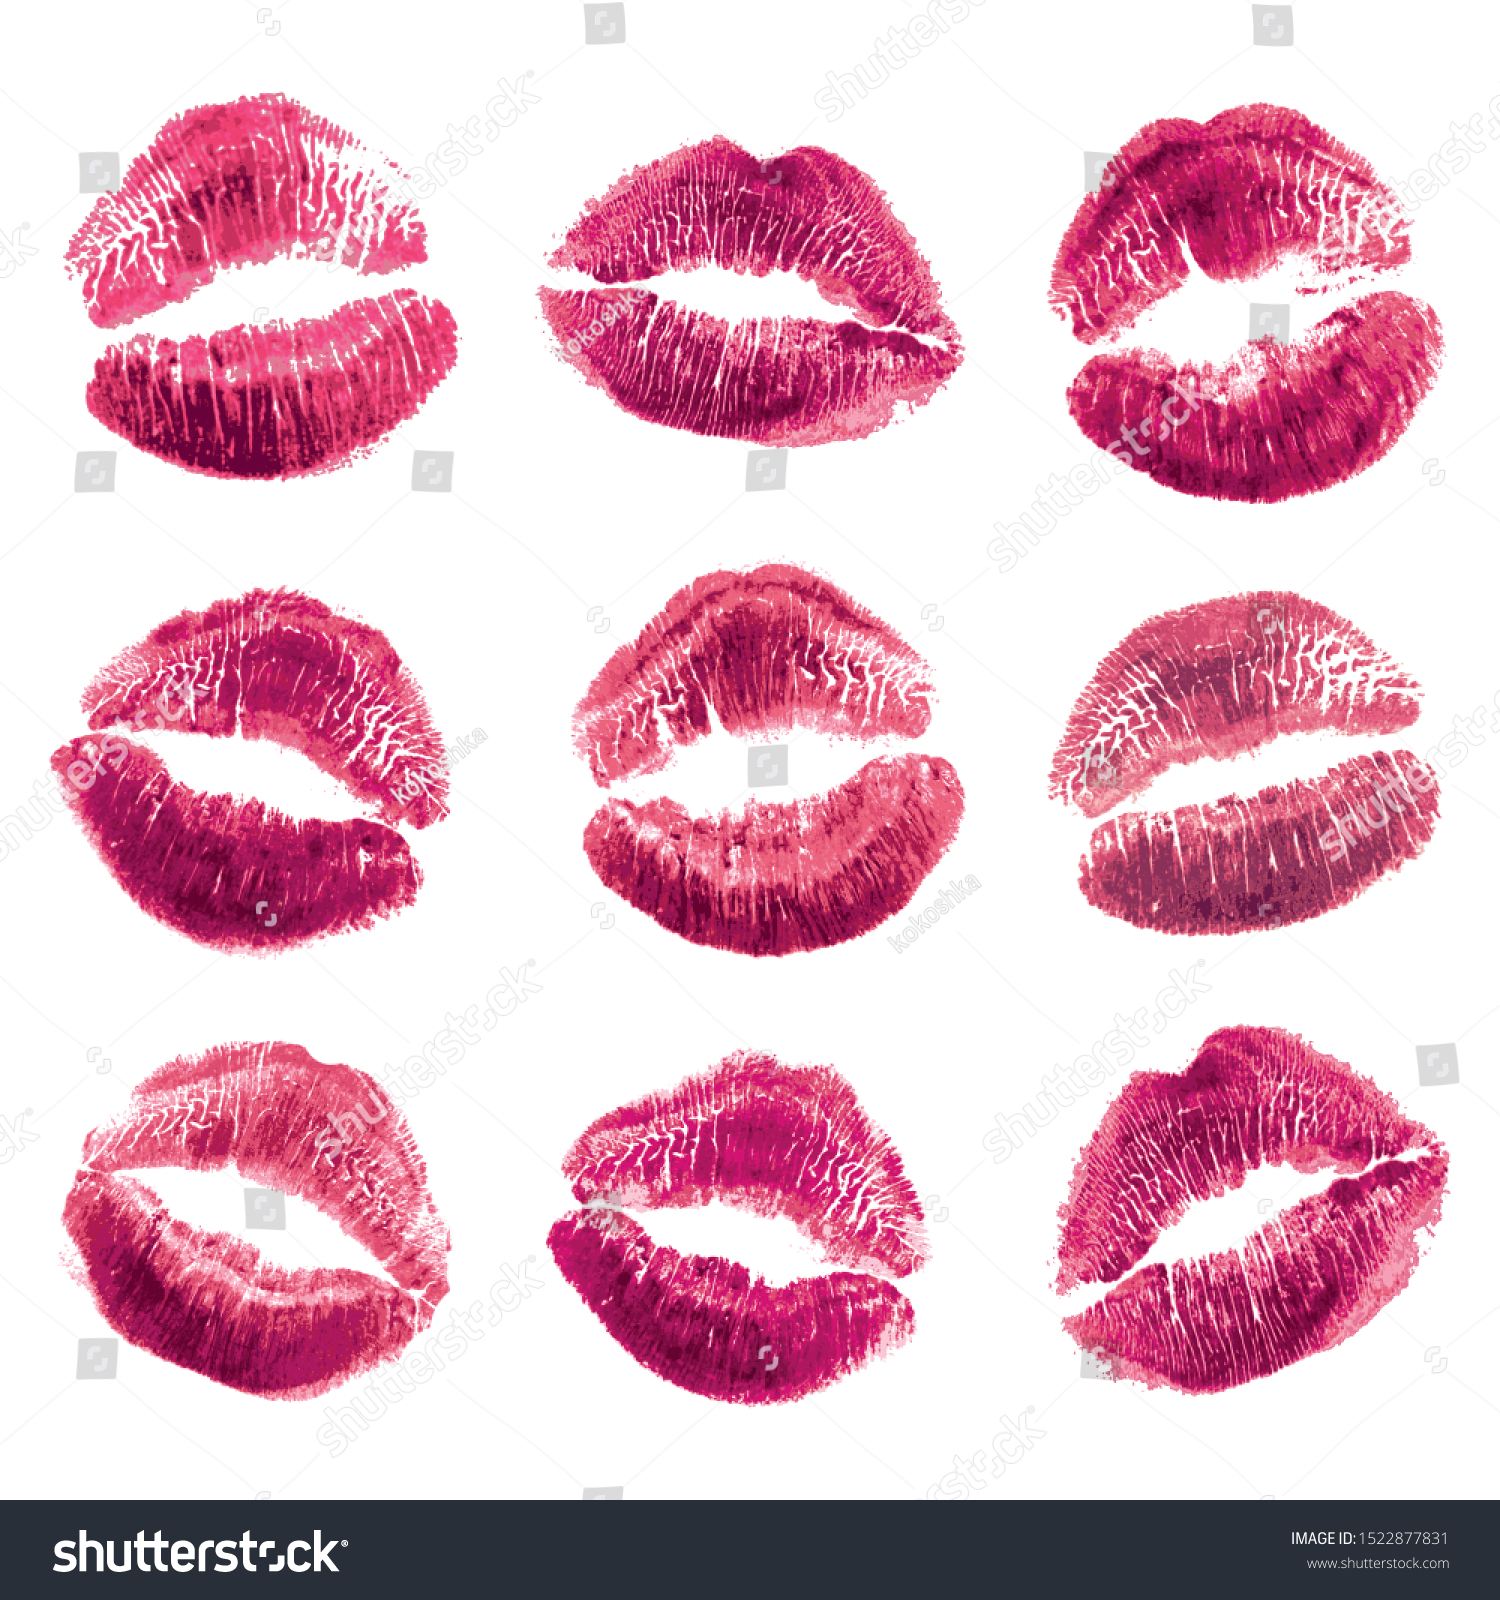 Vector Set Realistic Illustration Womans Girl Stock Vector Royalty Free 1522877831 Shutterstock